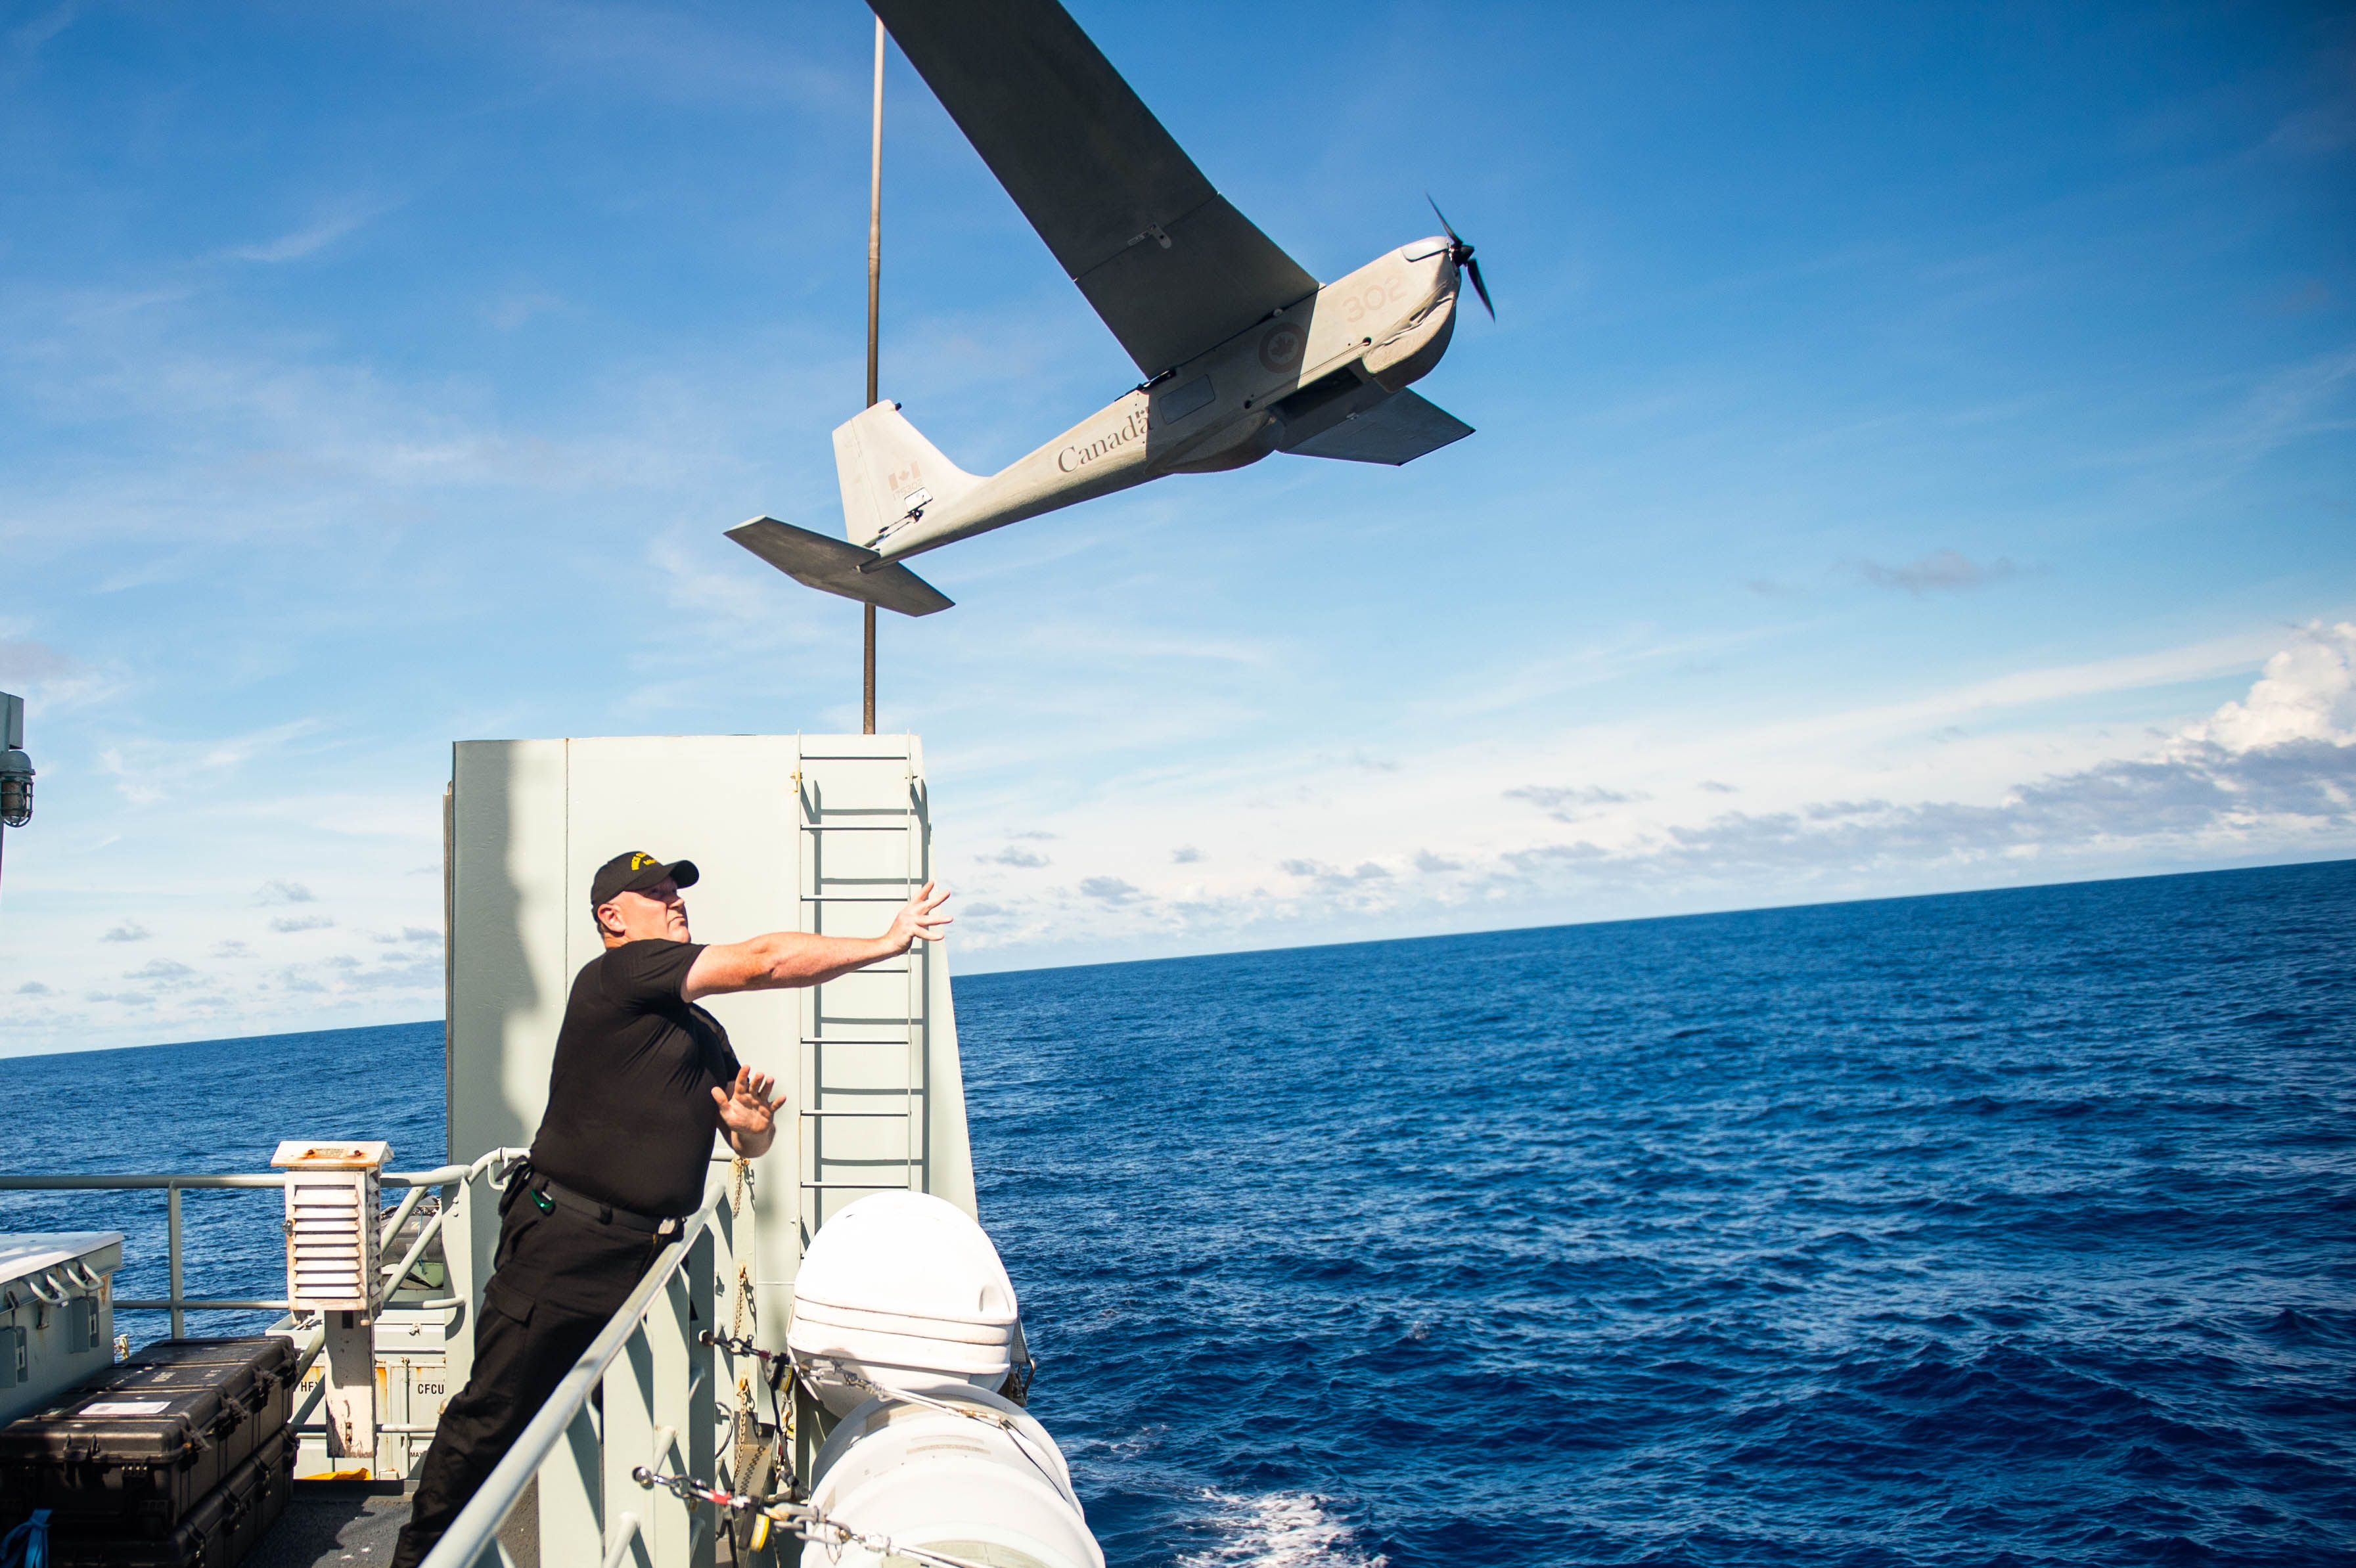 A Royal Canadian Navy member launches a Puma unmanned aerial system